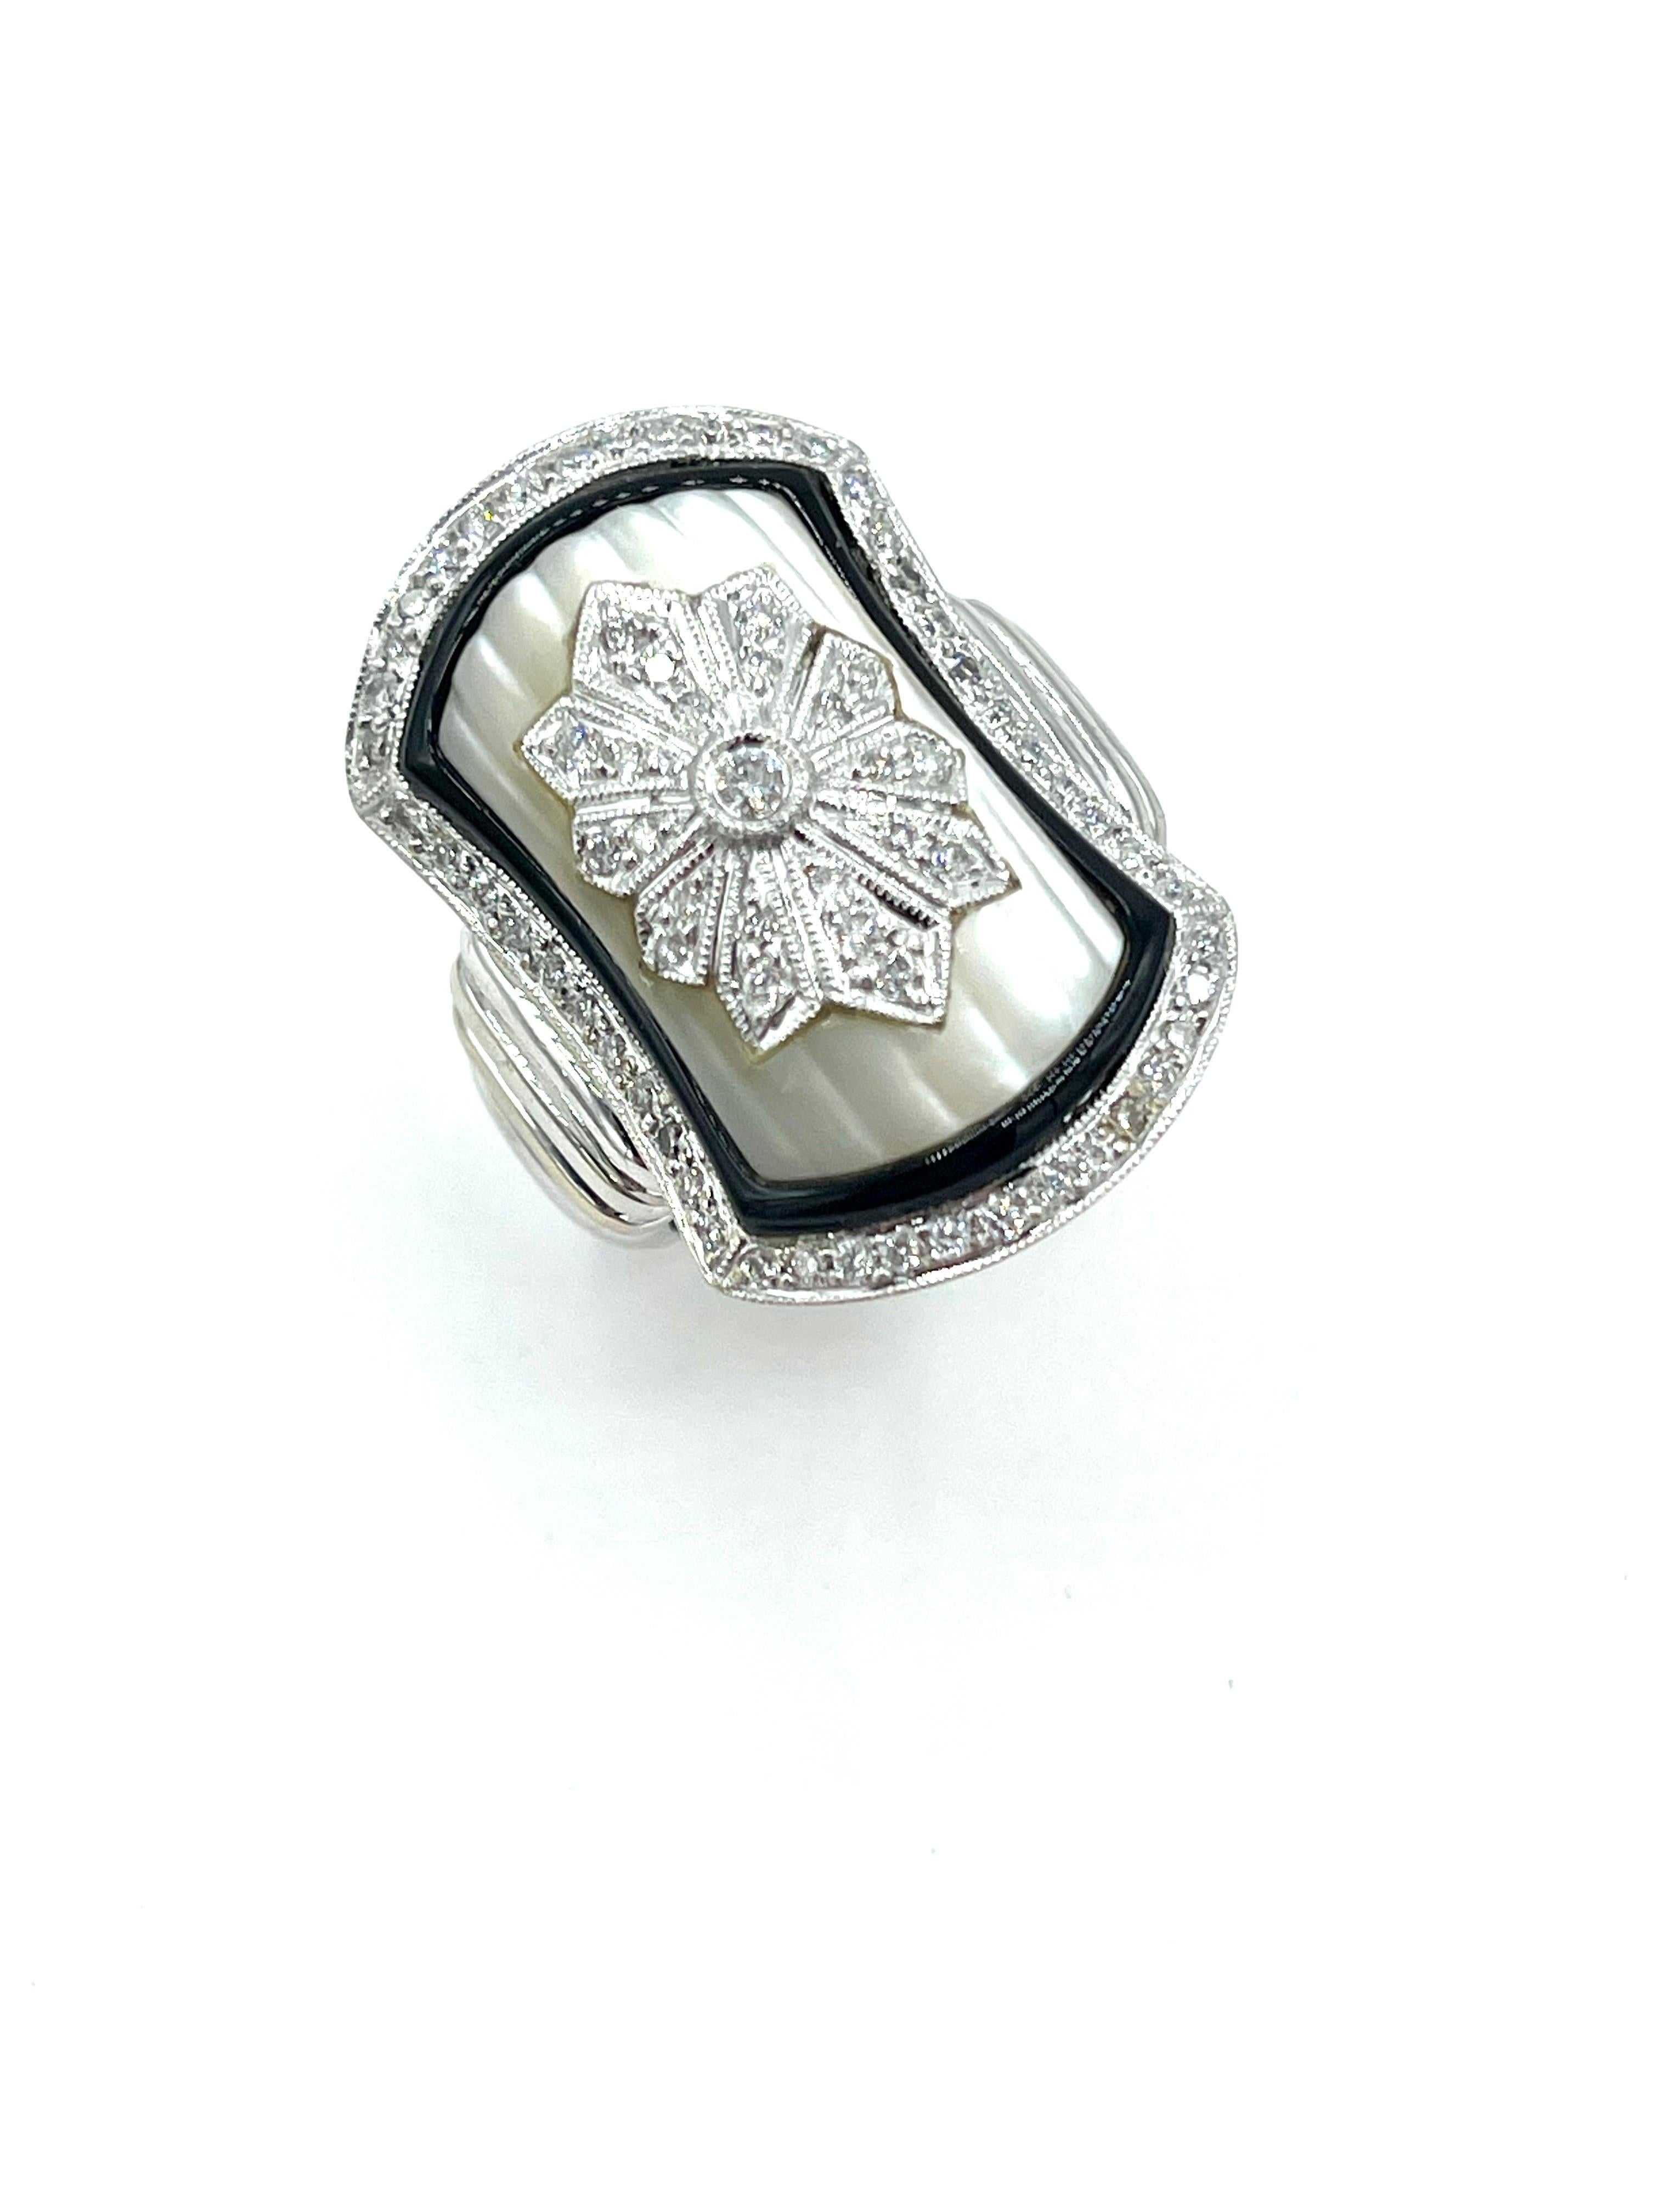  An amazing ring in every aspect.  The ring is designed with a filigree Diamond center set in carved Mother of Pearl, and framed in a single row of Onyx and Diamonds.  The ring is made in 18K white gold.  There is a total of 0.52 carats in round